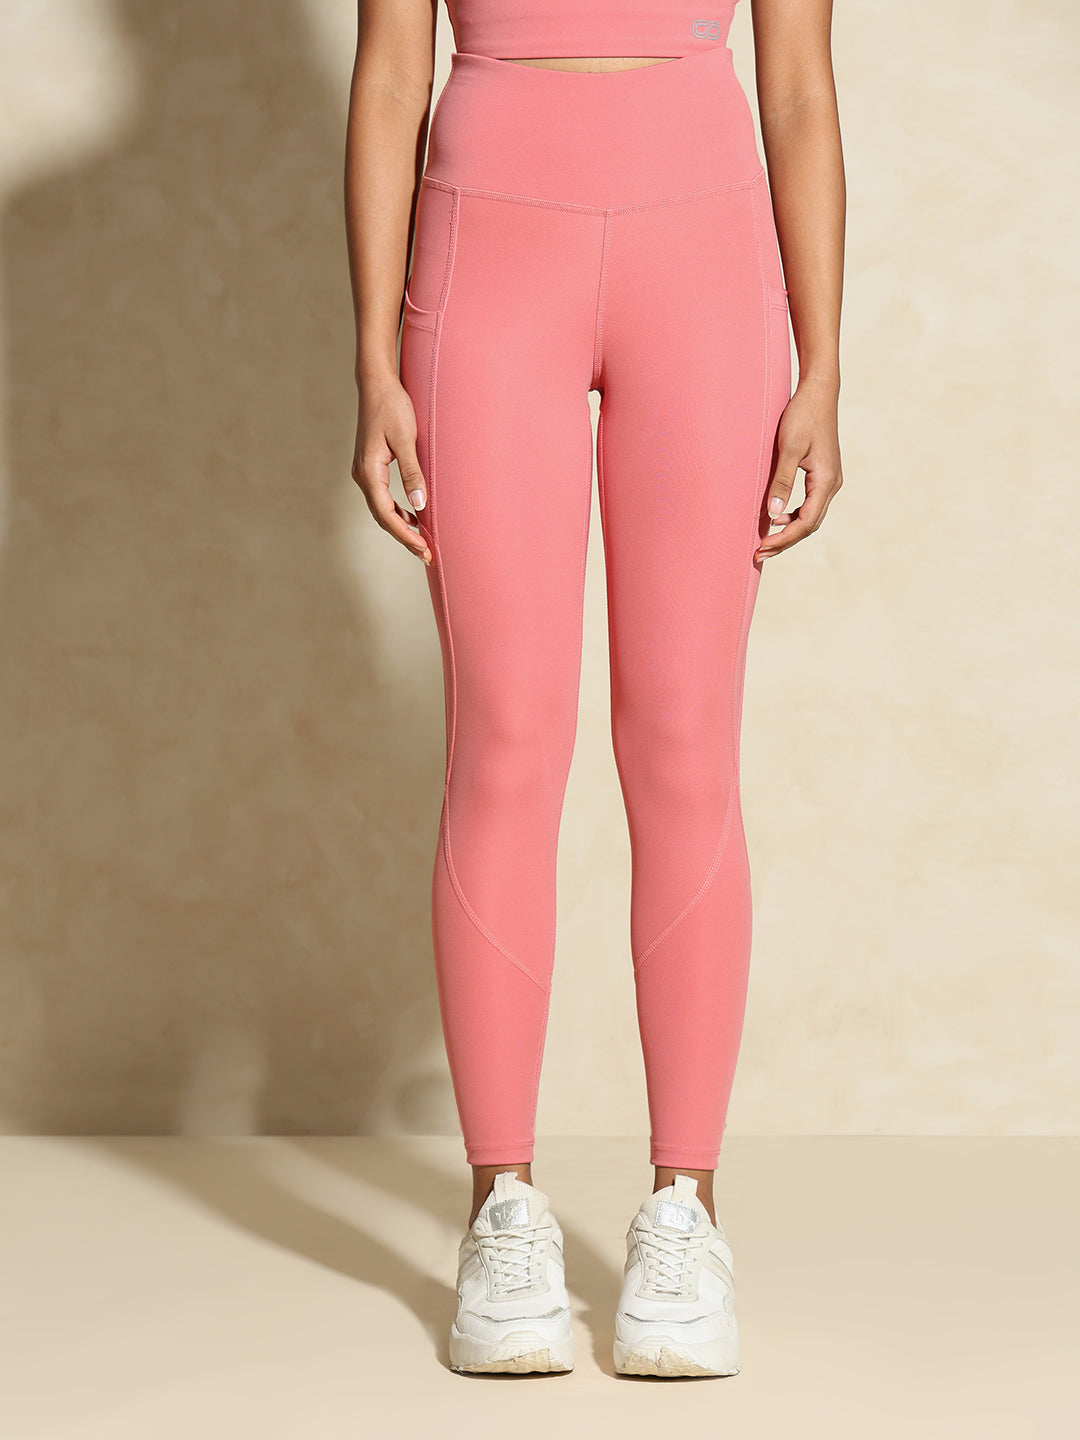 Peony Pink Keyhole Back Crop Top with Clasp & Aura Leggings